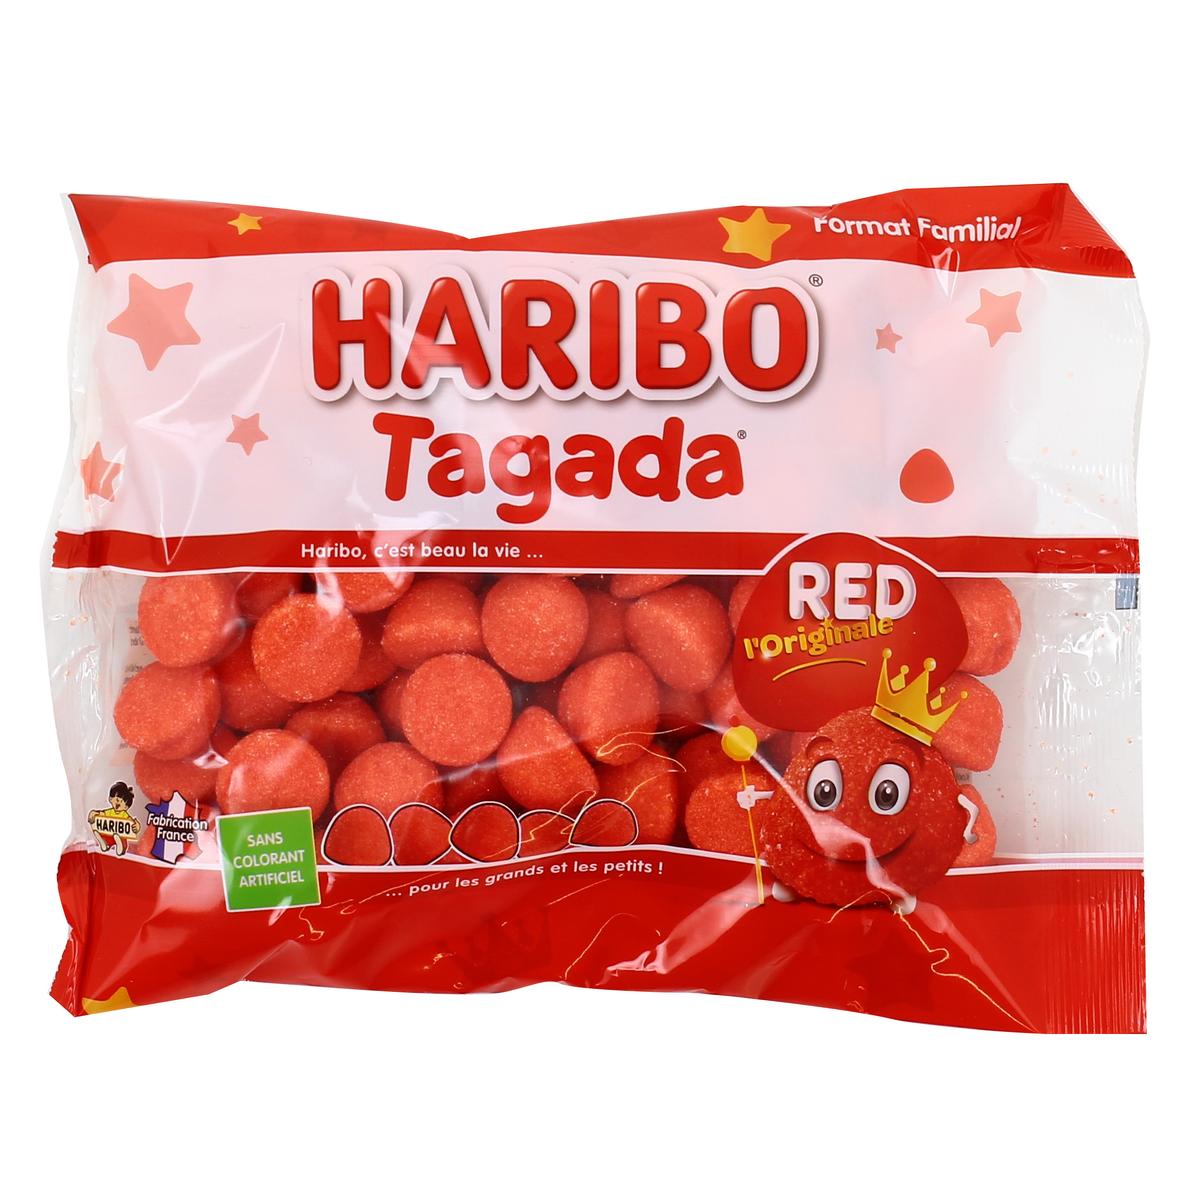 TAGADA HARIBO – day by day l'éco-drive Grenoble